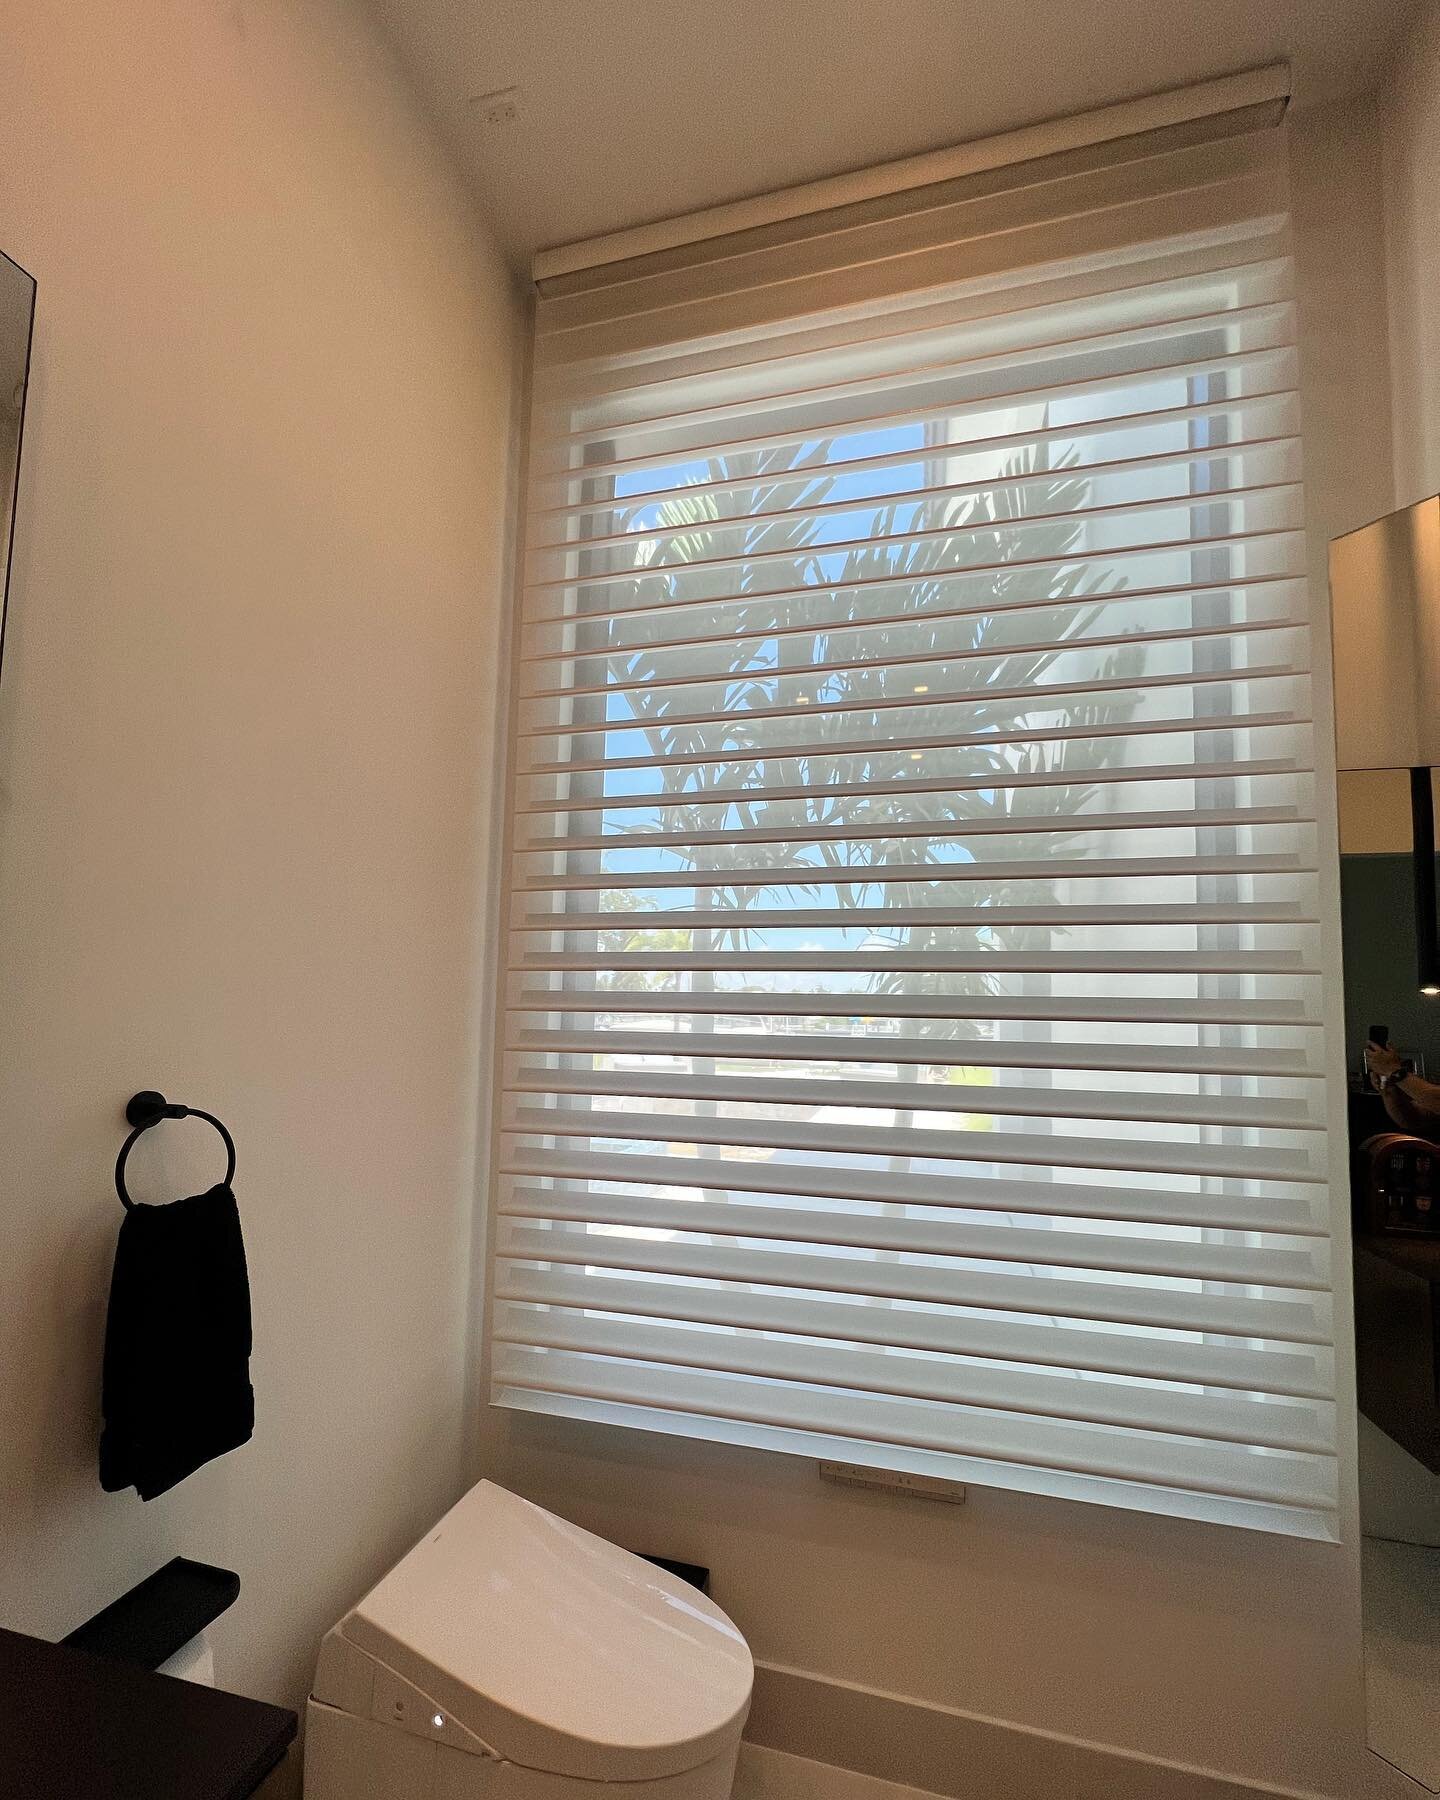 Silhouettes by Hunter Douglas. Check out these beautiful shades by Hunter Douglas. They provide privacy and light filtering.